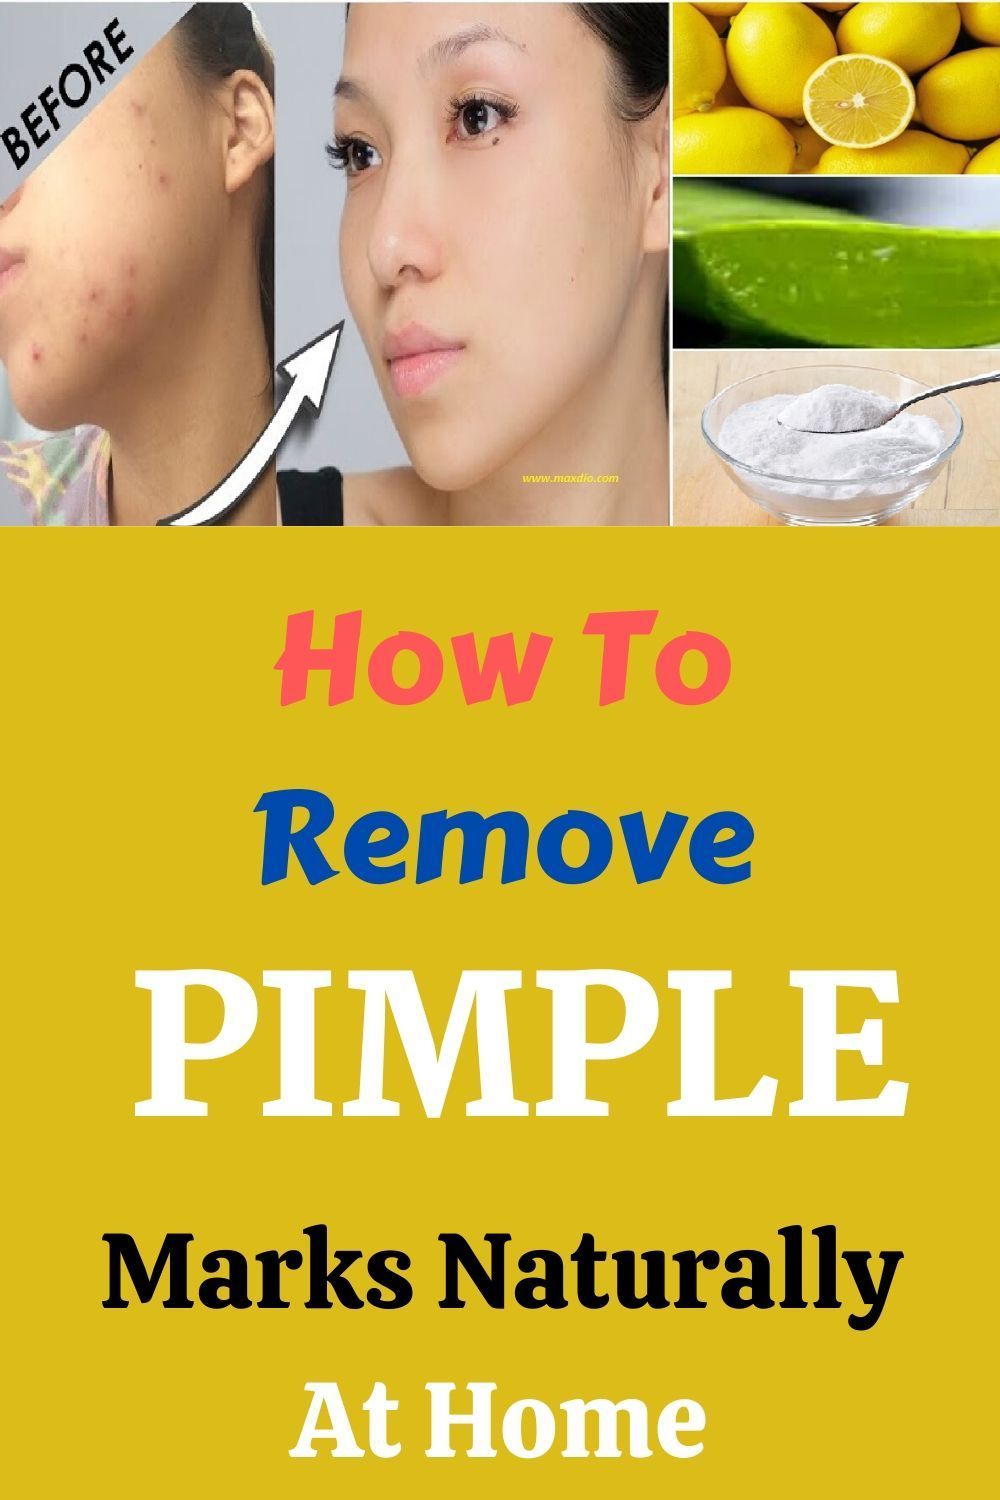 How To Remove Pimple Marks Naturally At Home - How To Remove Pimple Marks Naturally At Home -   18 beauty Treatments pimples ideas